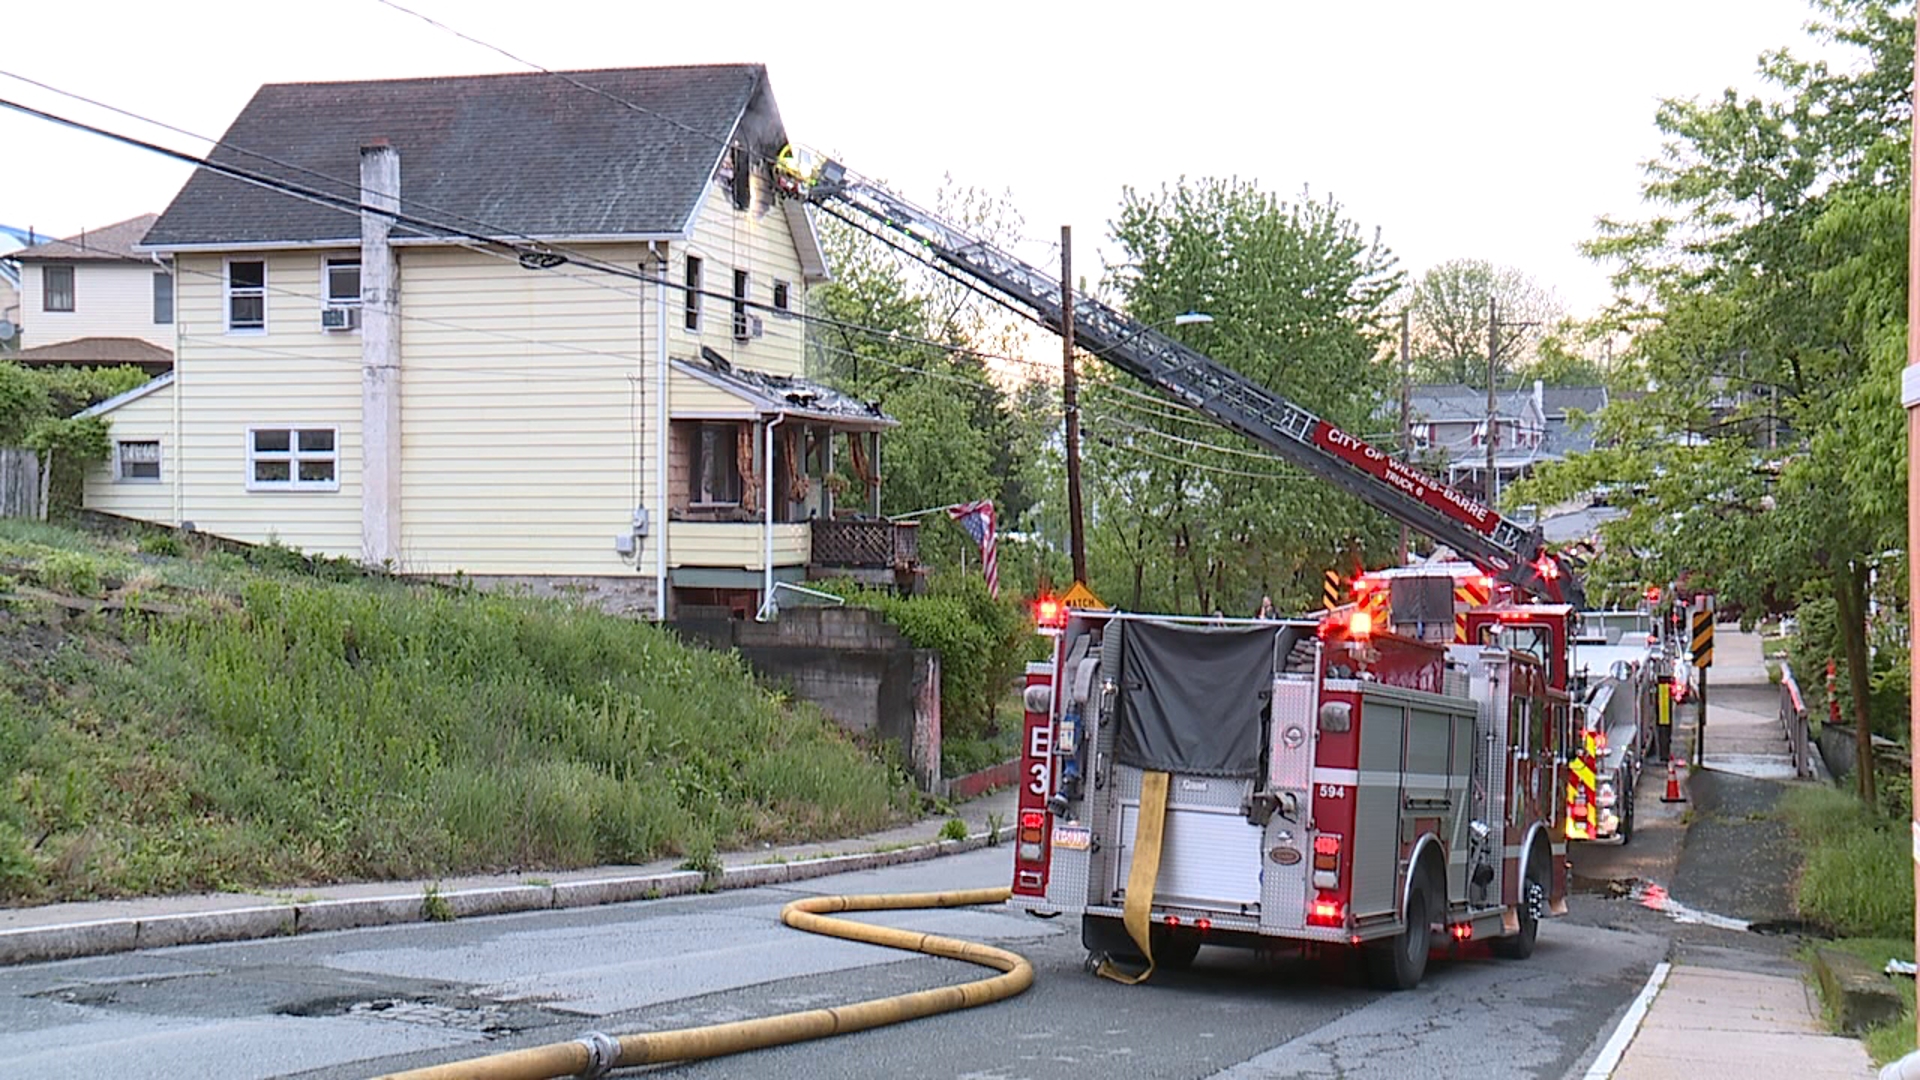 The fire started around 5:30 a.m. Saturday along McLean Street in the Diamond City.